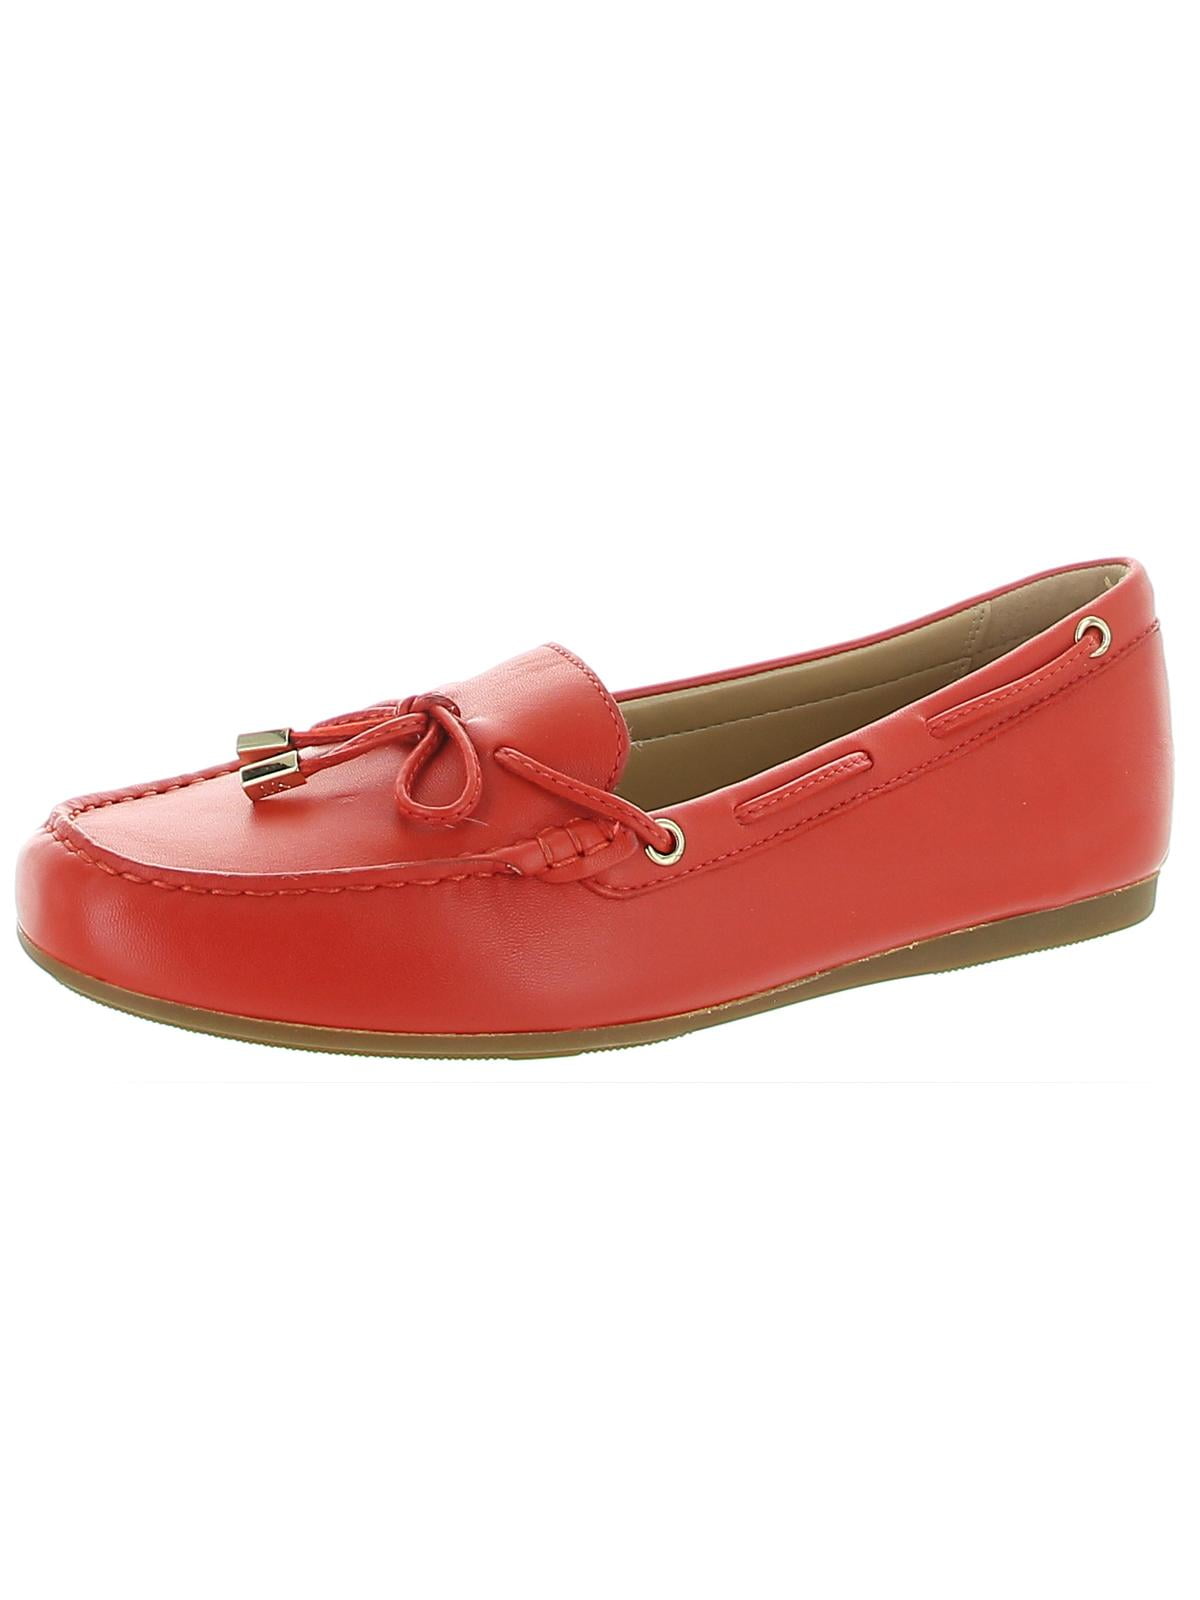 MICHAEL Michael Kors Womens Sutton Leather Slip On Loafers Red 7.5 ...